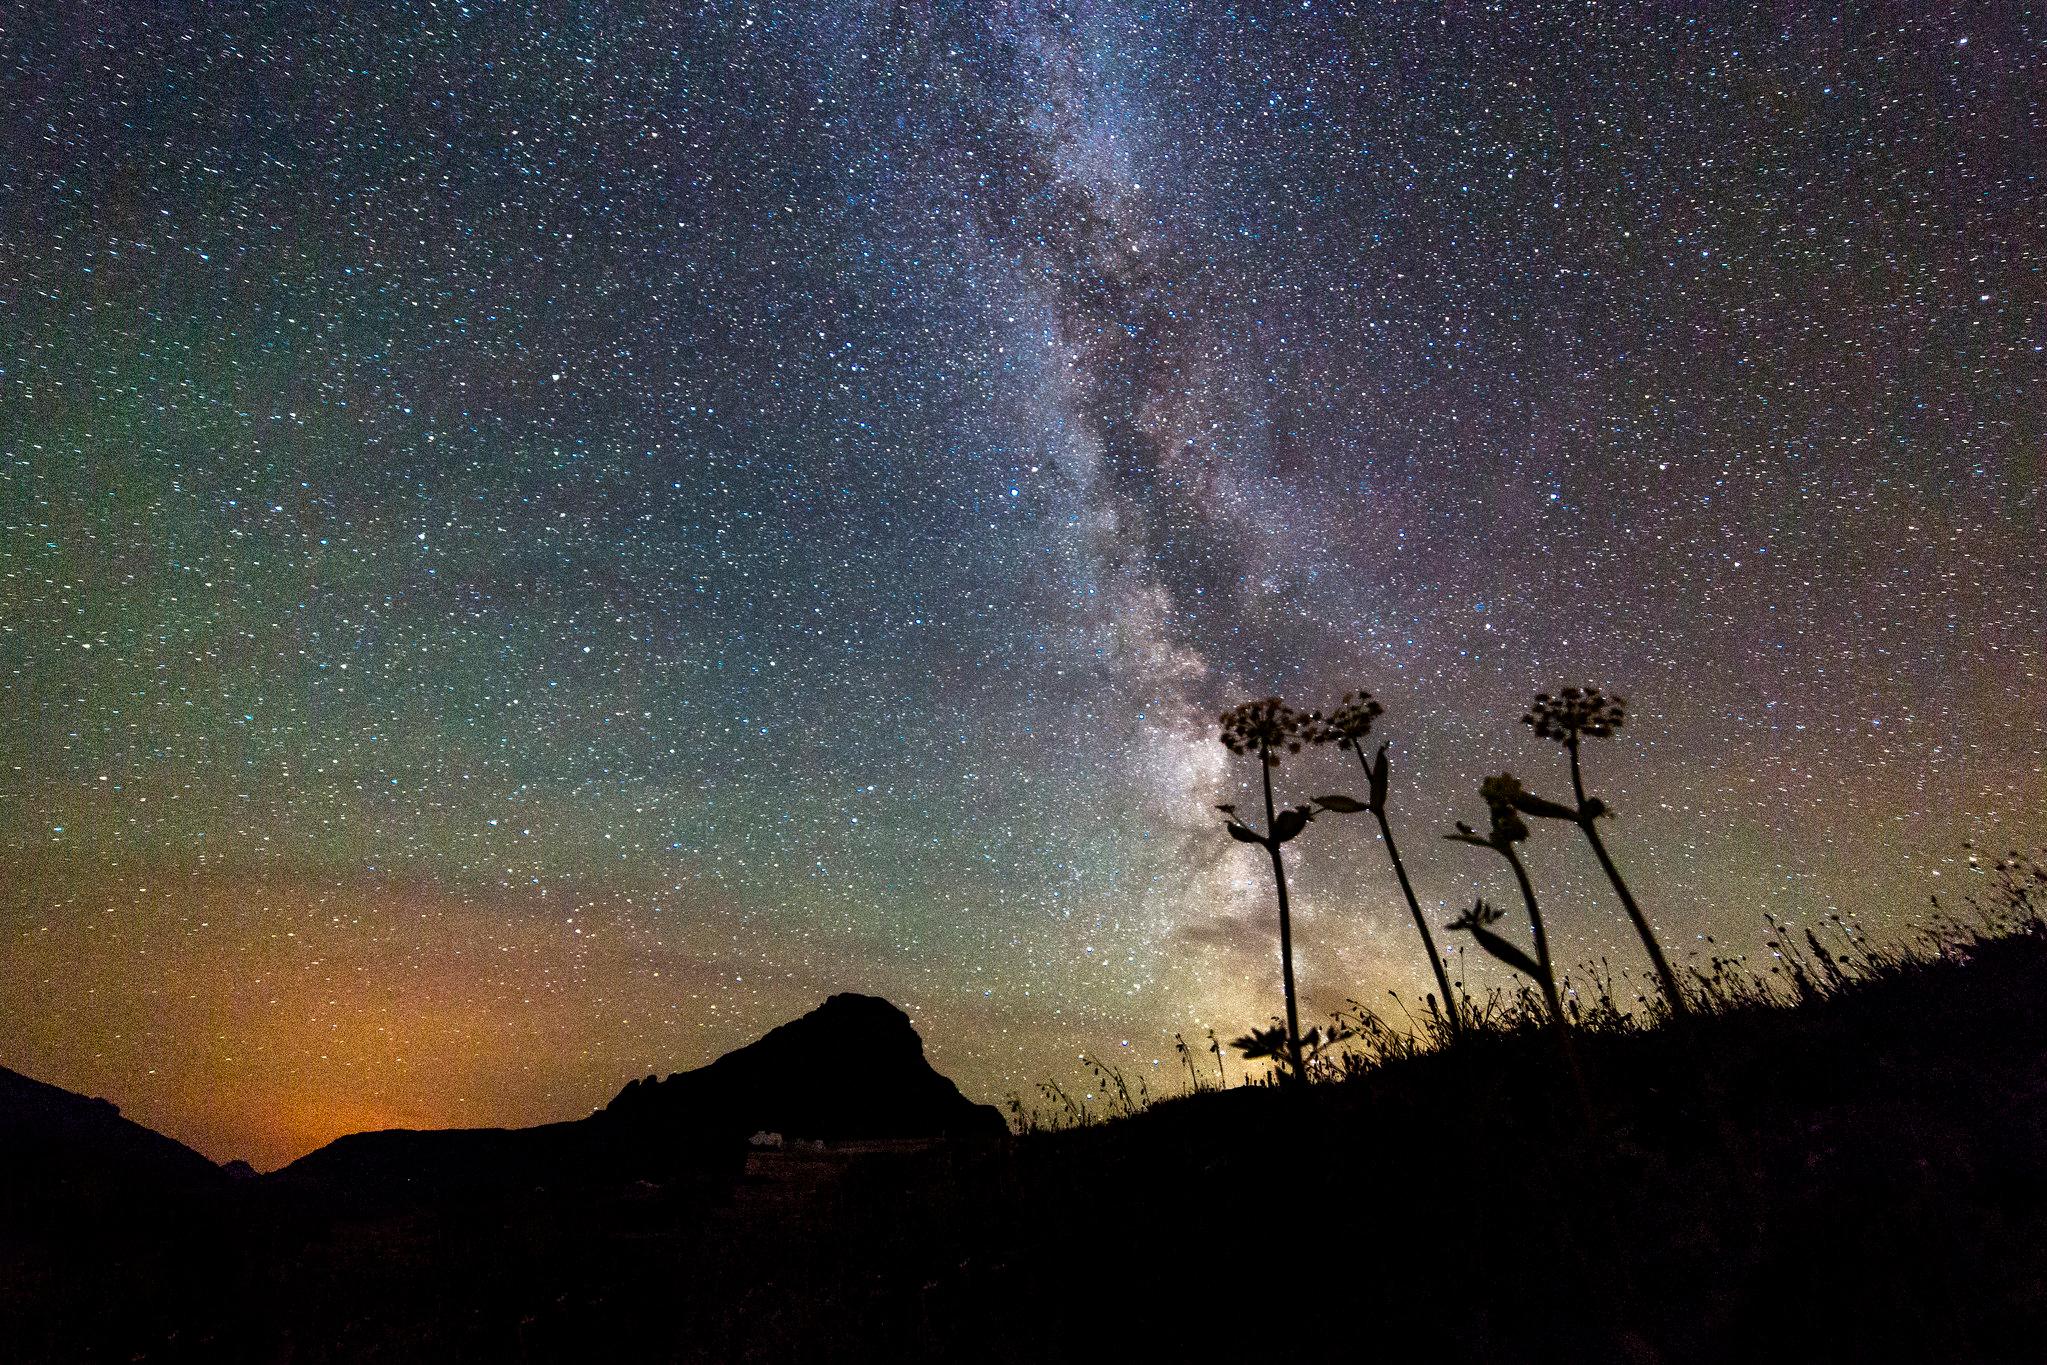 Silhouetted mountains and flowers against a night sky filled with stars and a milky band of light.